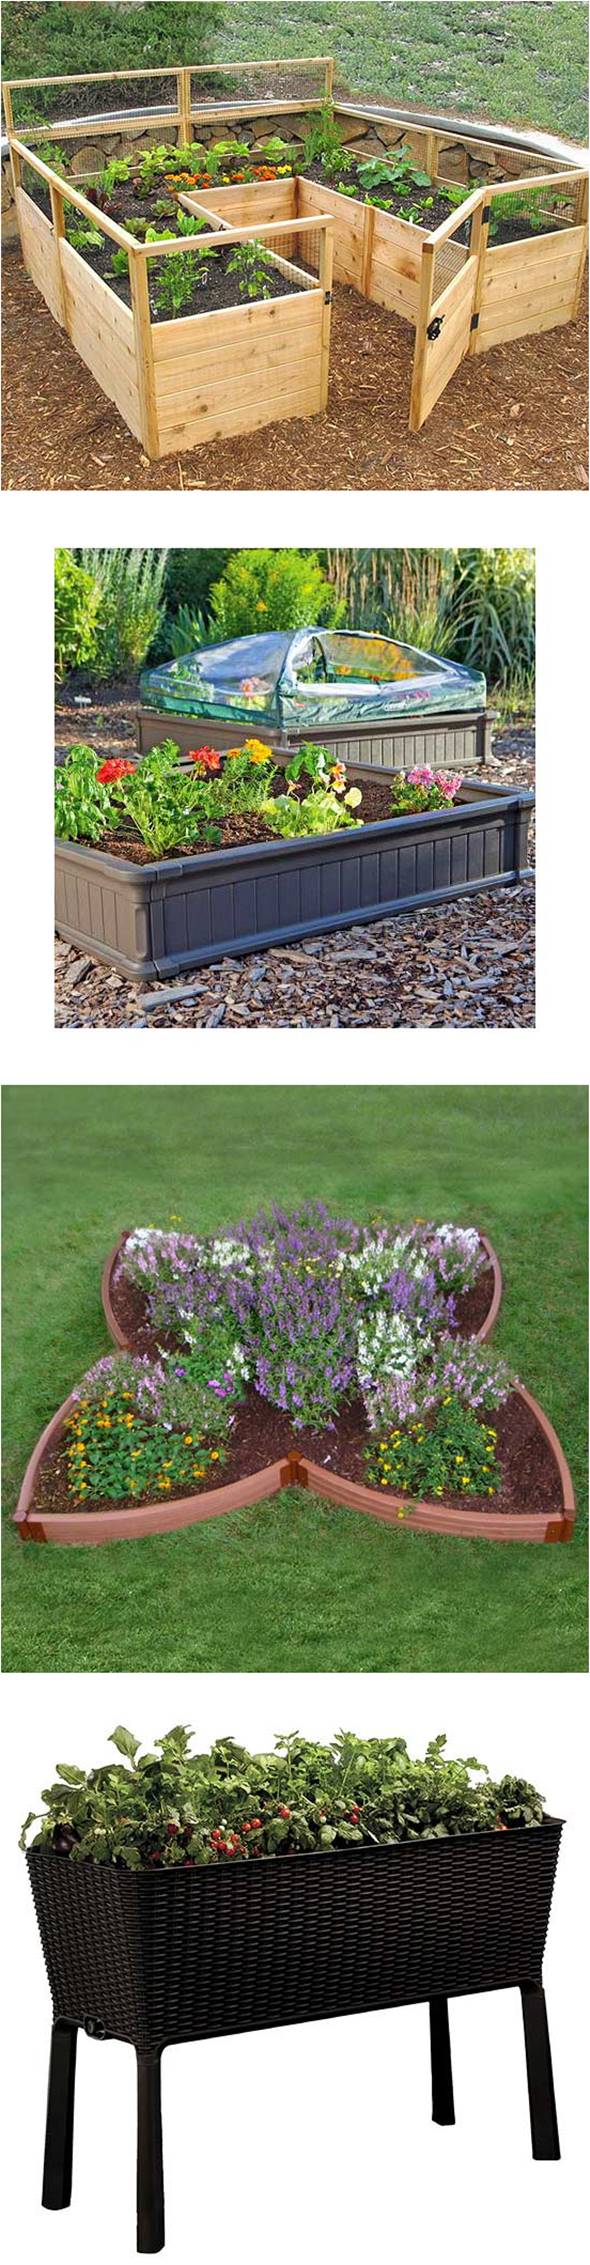 13 Raised Garden Bed Kits That Are Easy To Assemble